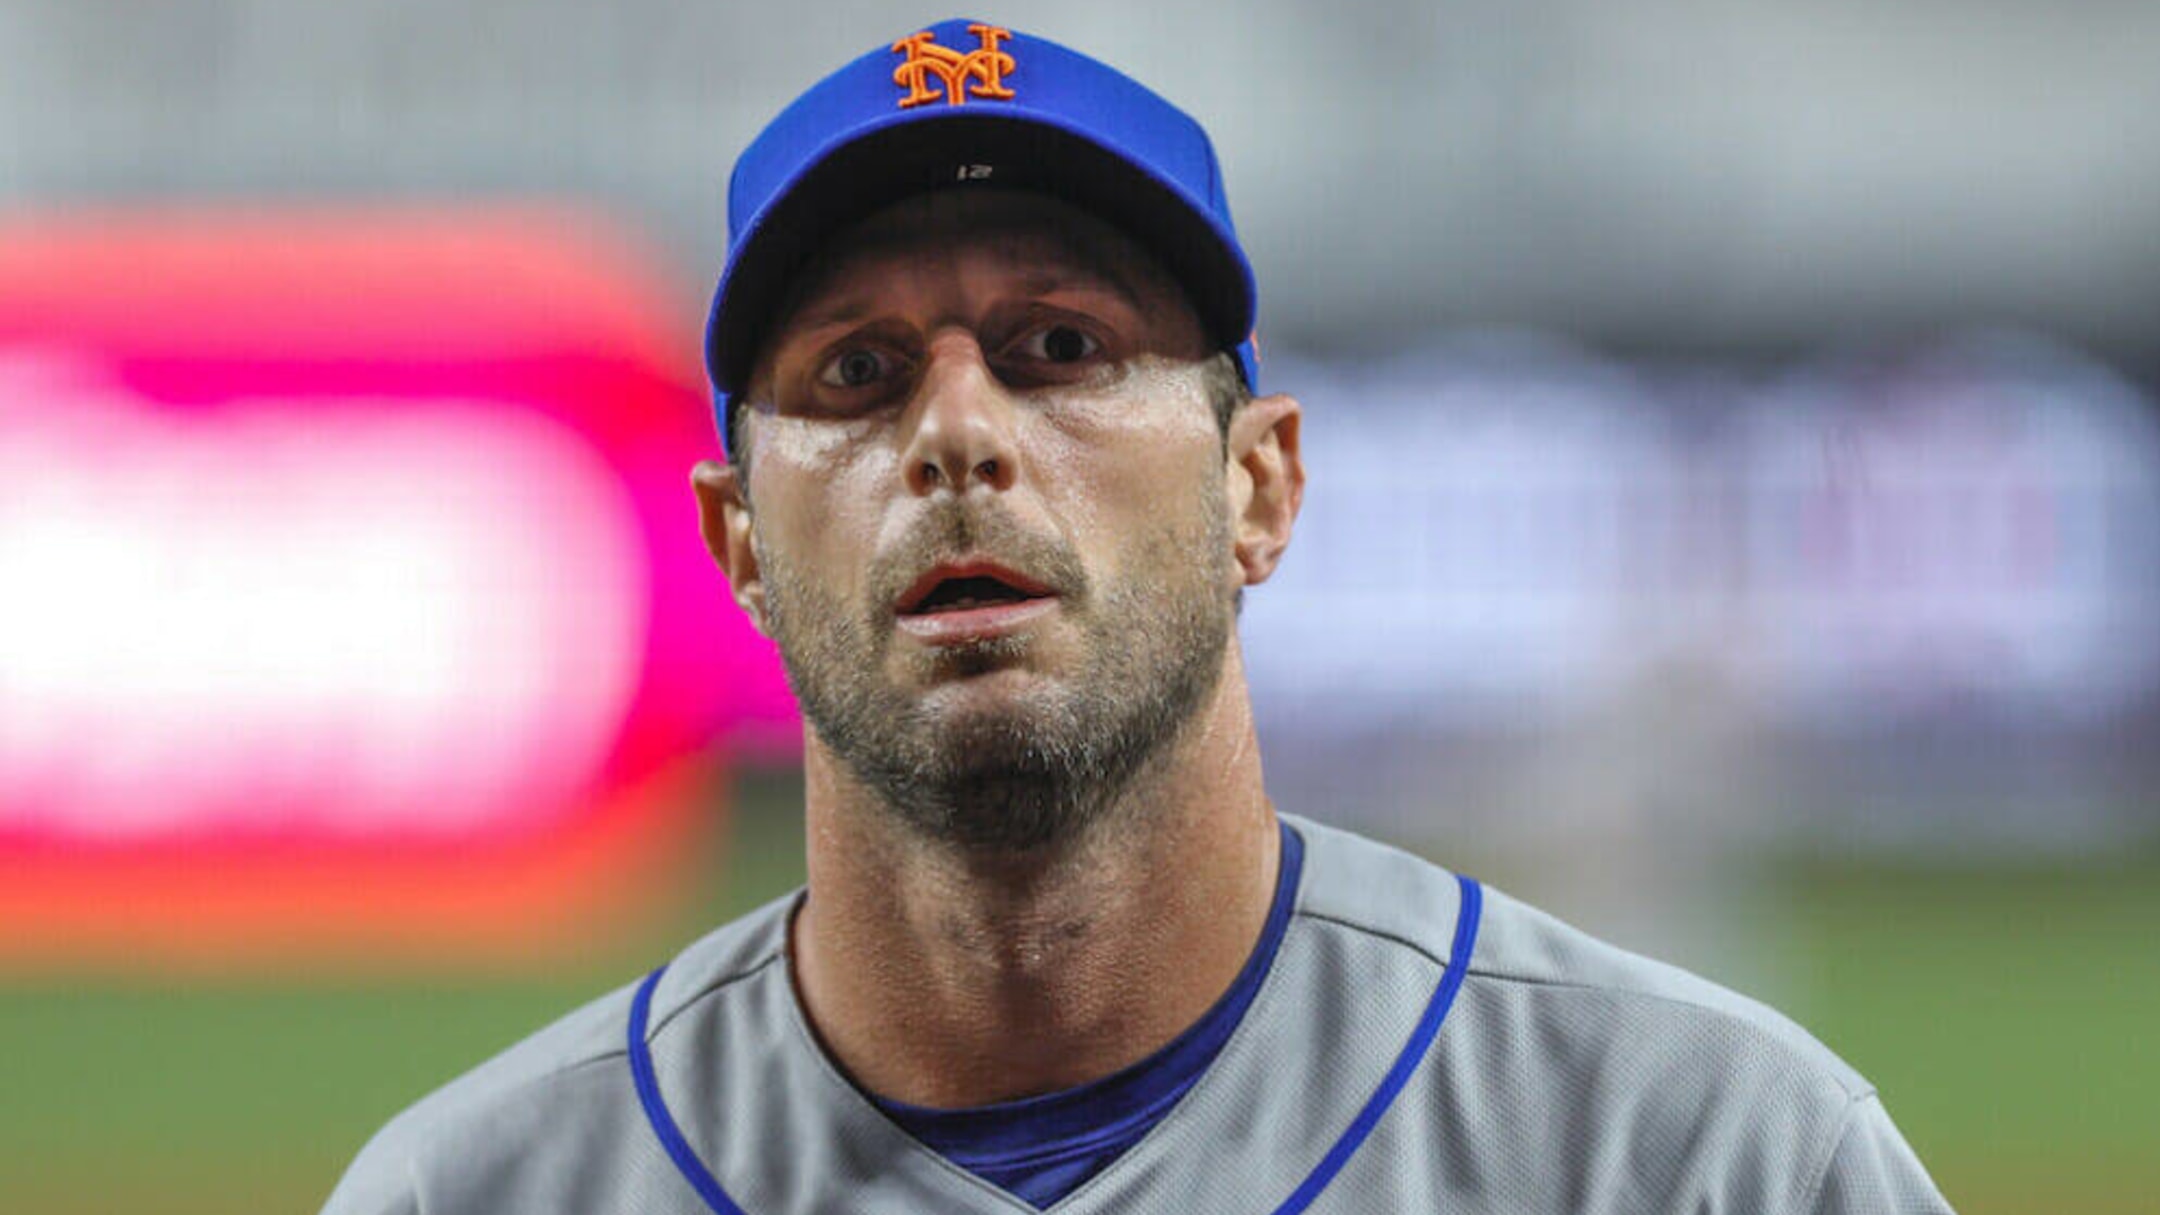 Mets' Max Scherzer leaves game after 6 perfect innings, team